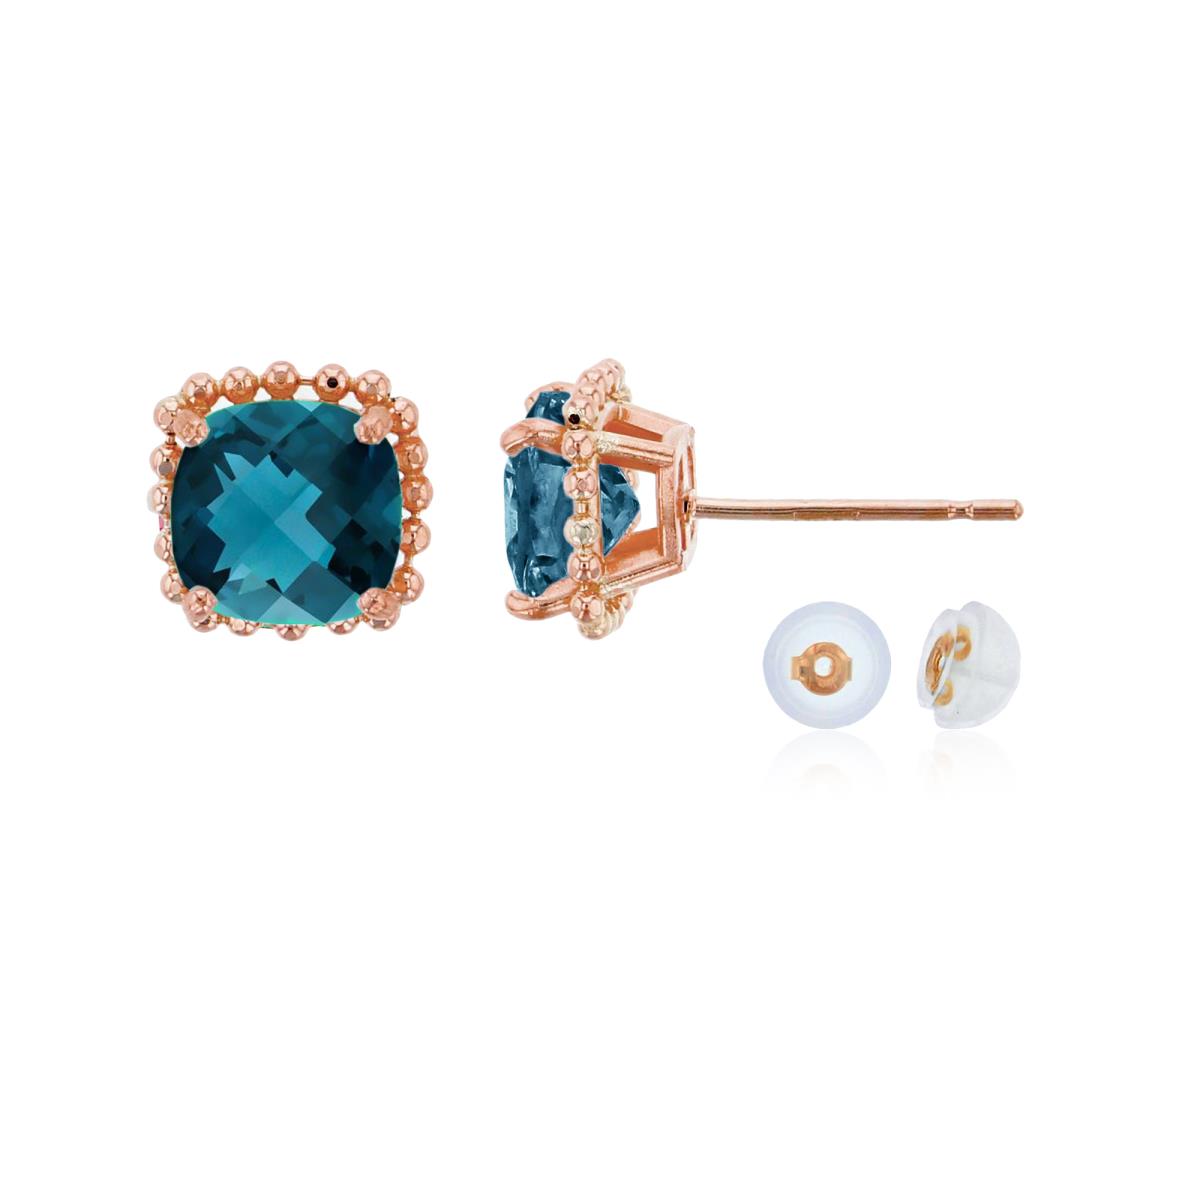 10K Rose Gold 6x6mm Cushion Cut London Blue Topaz Bead Frame Stud Earring with Silicone Back